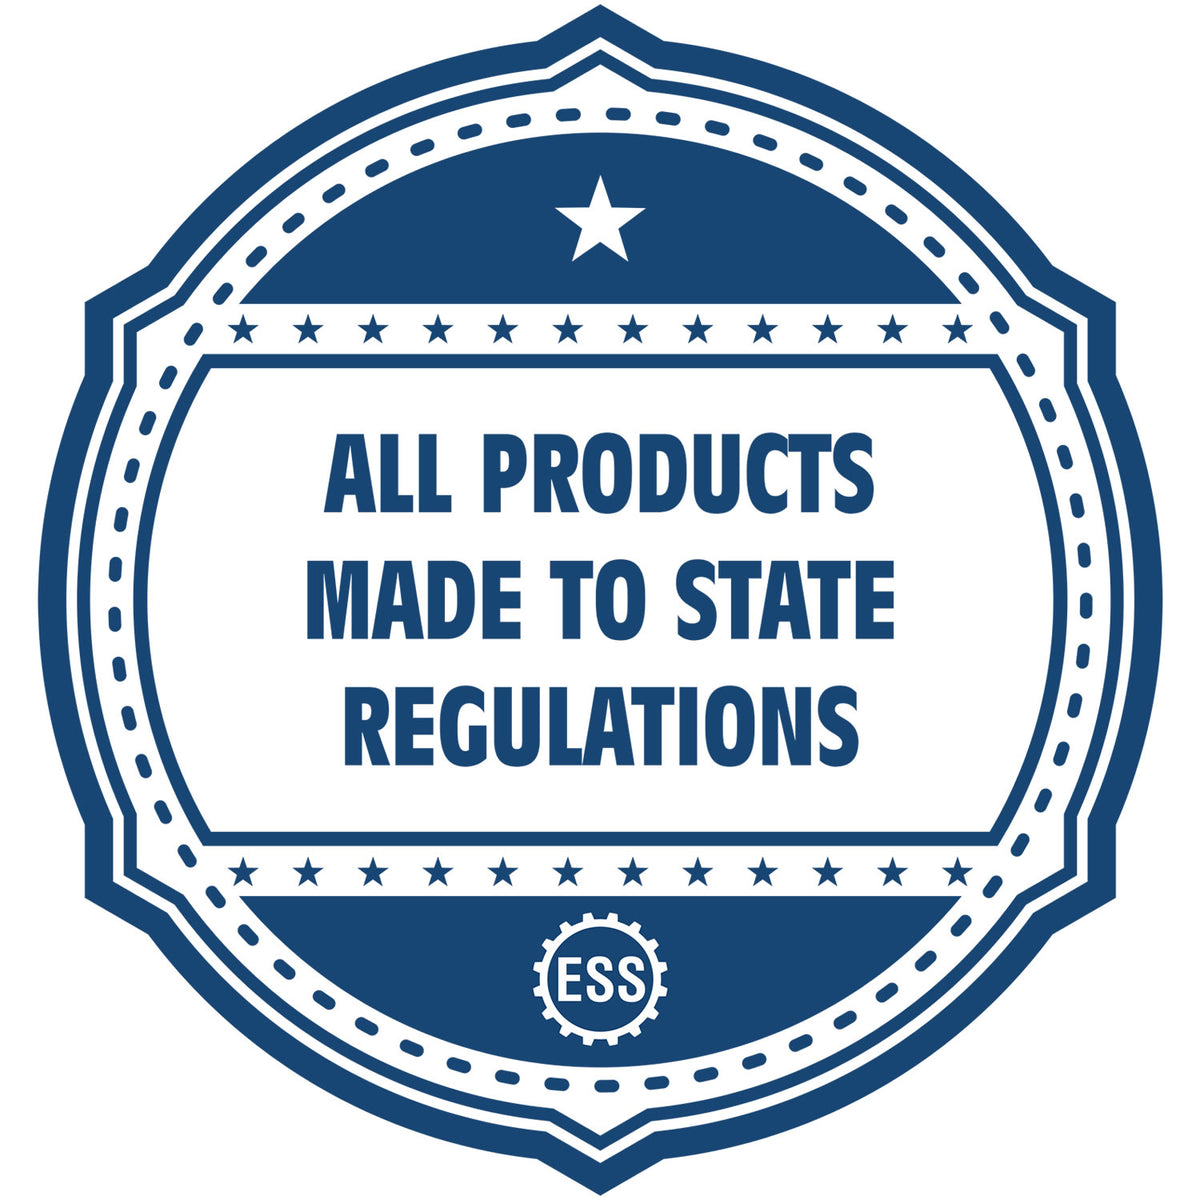 An icon or badge element for the PSI Oklahoma Notary Stamp showing that this product is made in compliance with state regulations.